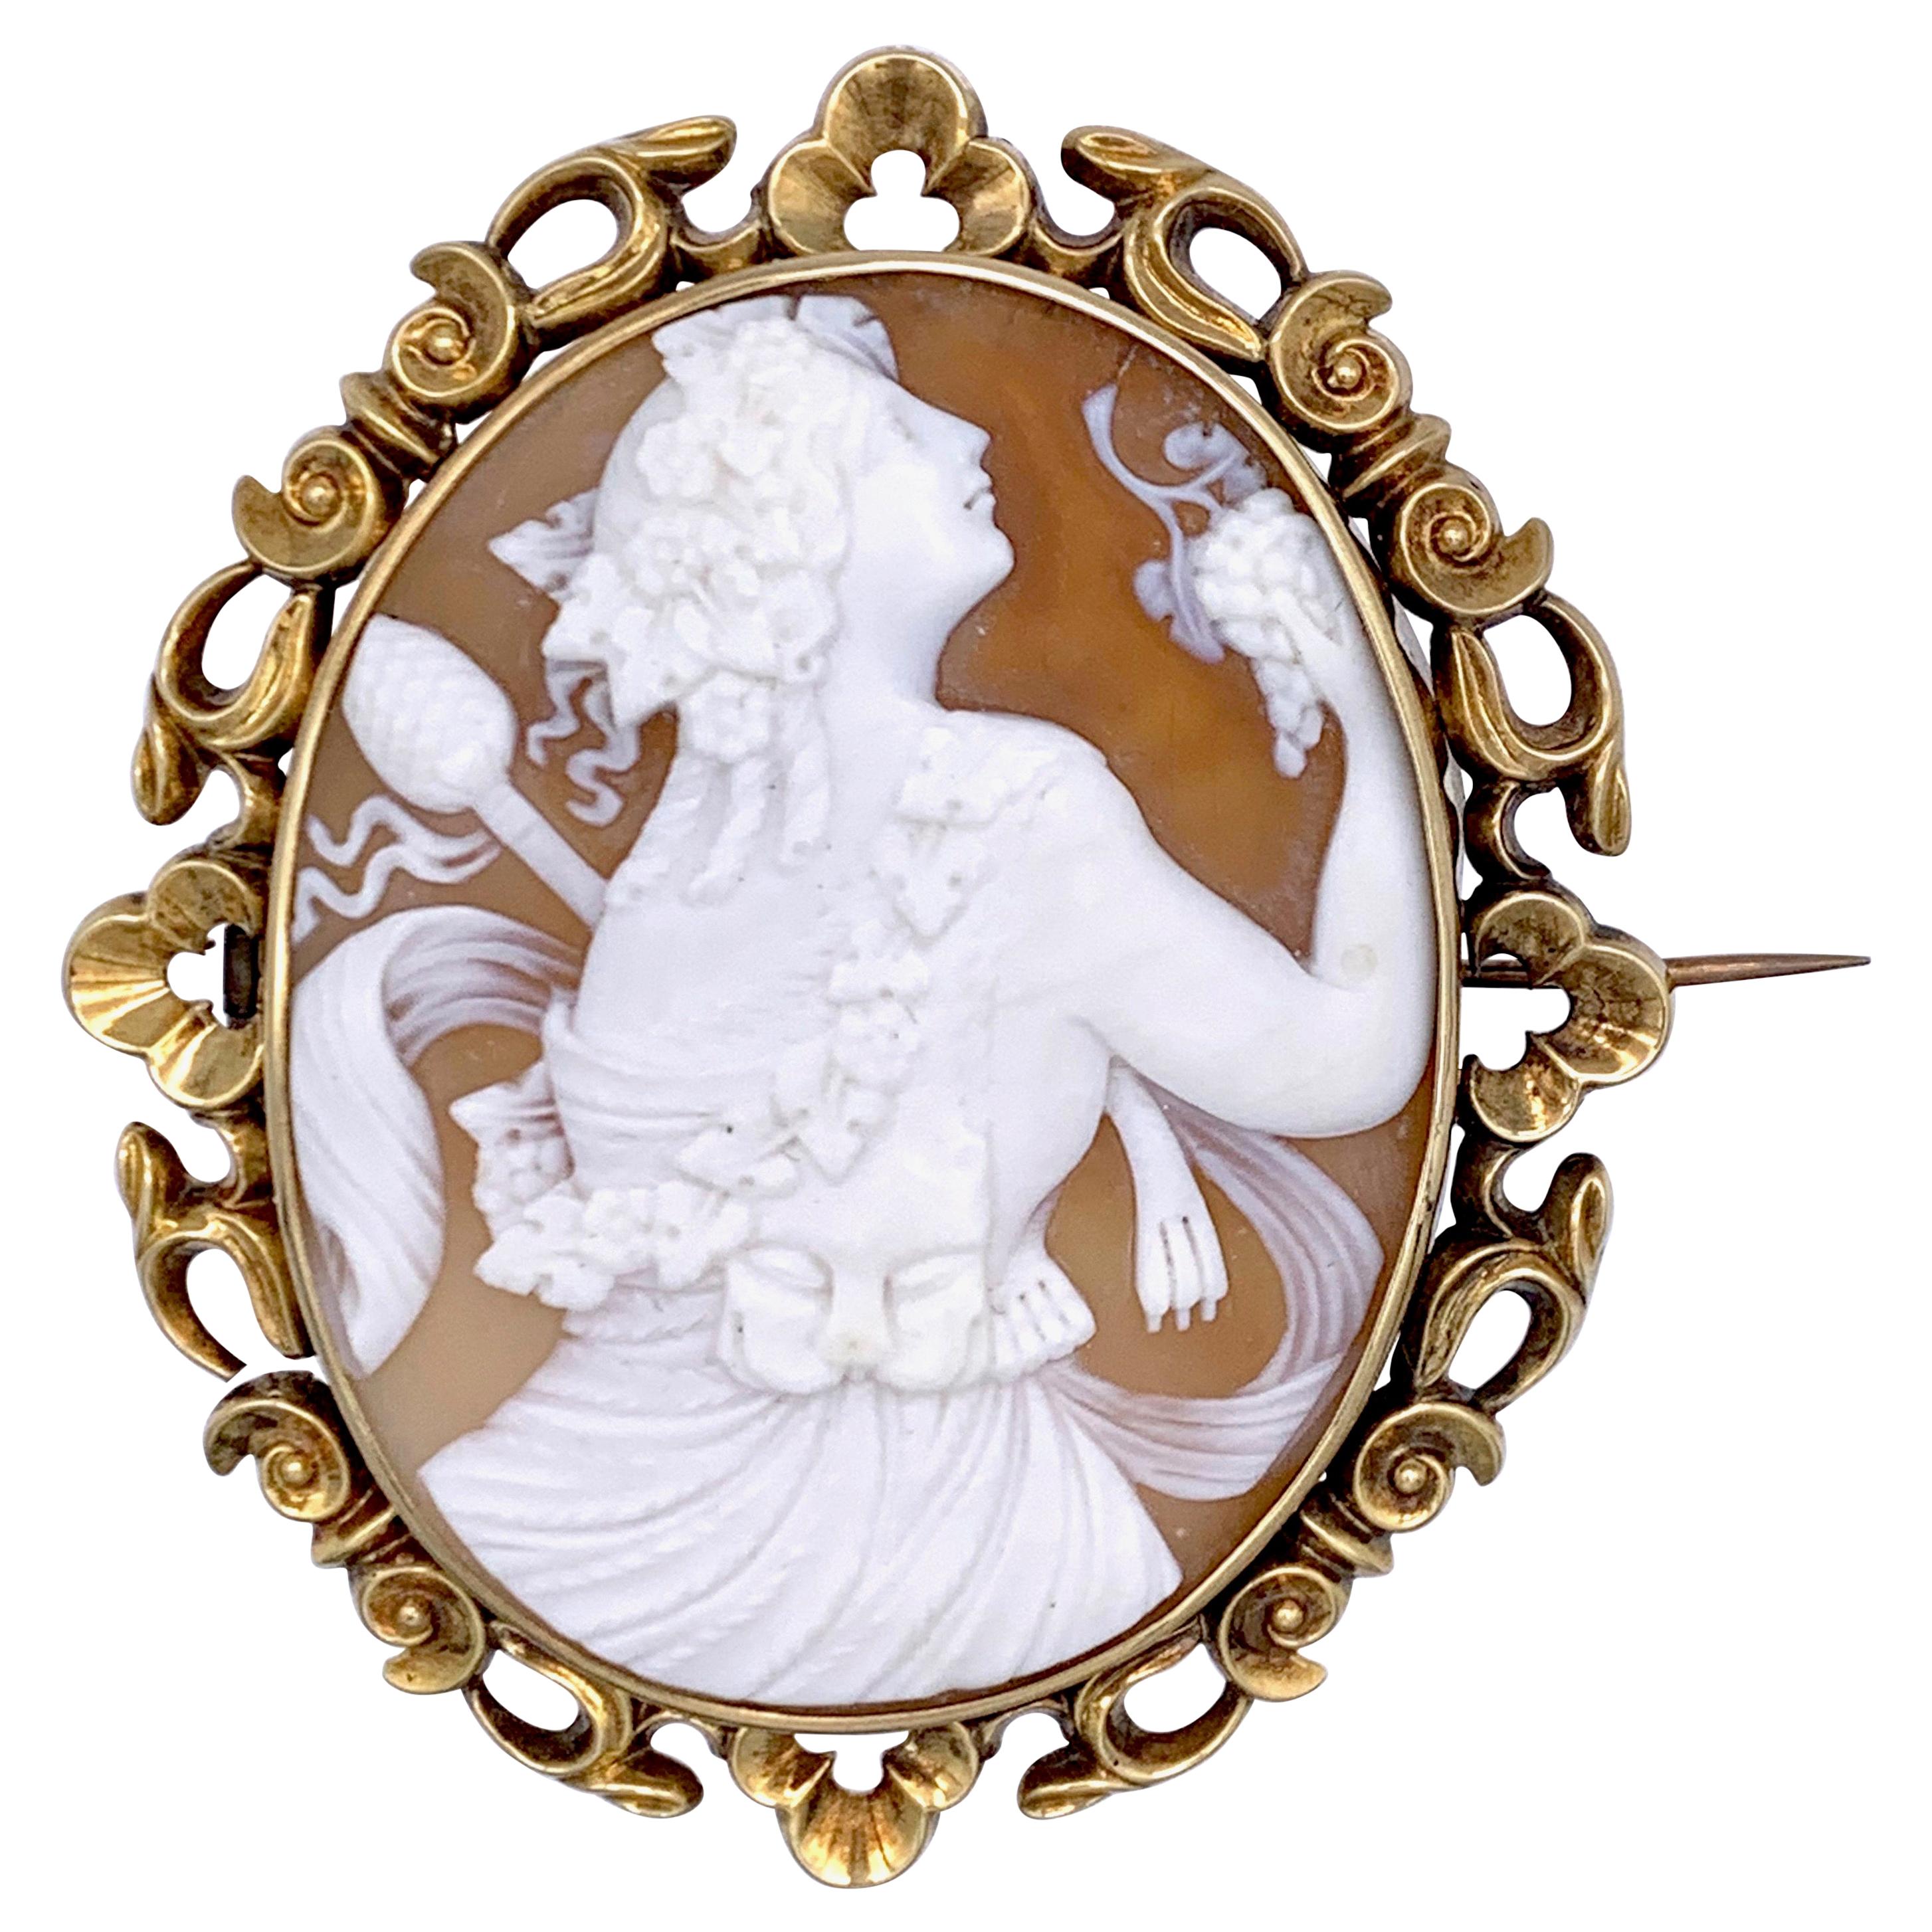 Antique Shell Cameo of a Dancing Bacchante Holding a Bunch of Grapes